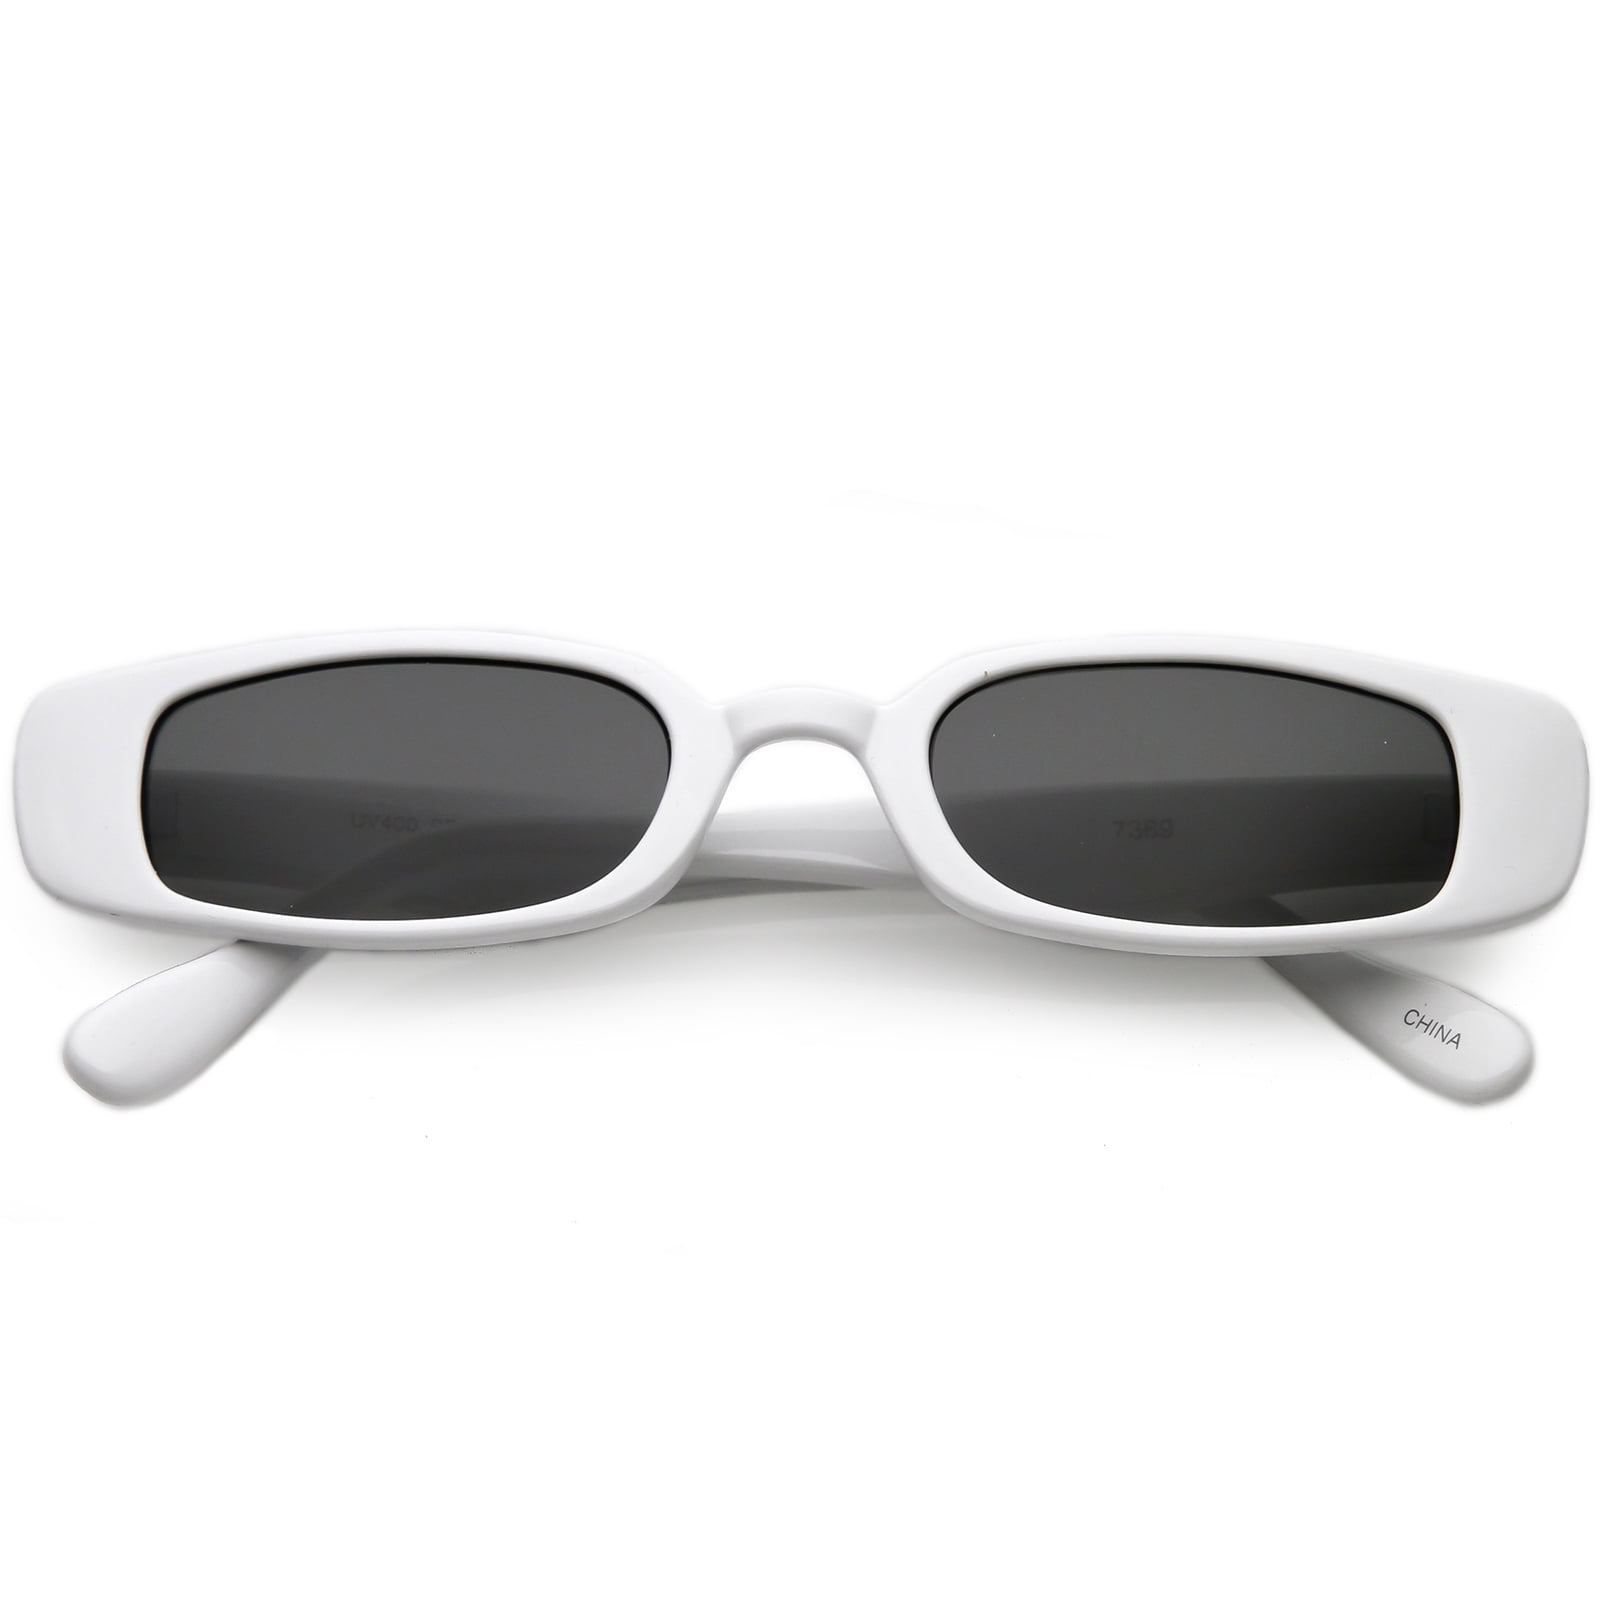 Extreme Thin Small Rectangle Sunglasses Neutral Colored Lens 49mm White Smoke